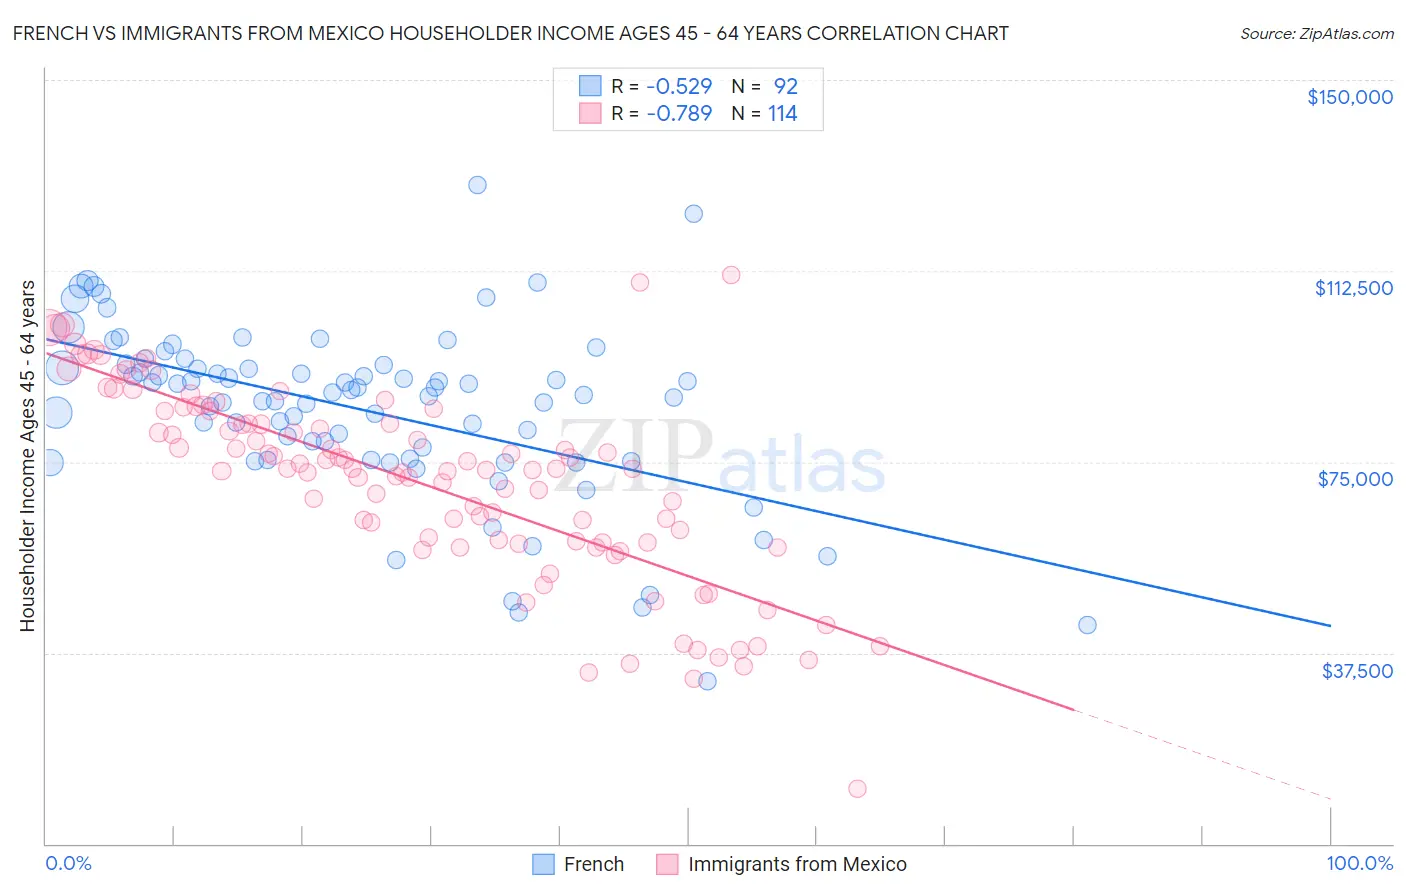 French vs Immigrants from Mexico Householder Income Ages 45 - 64 years